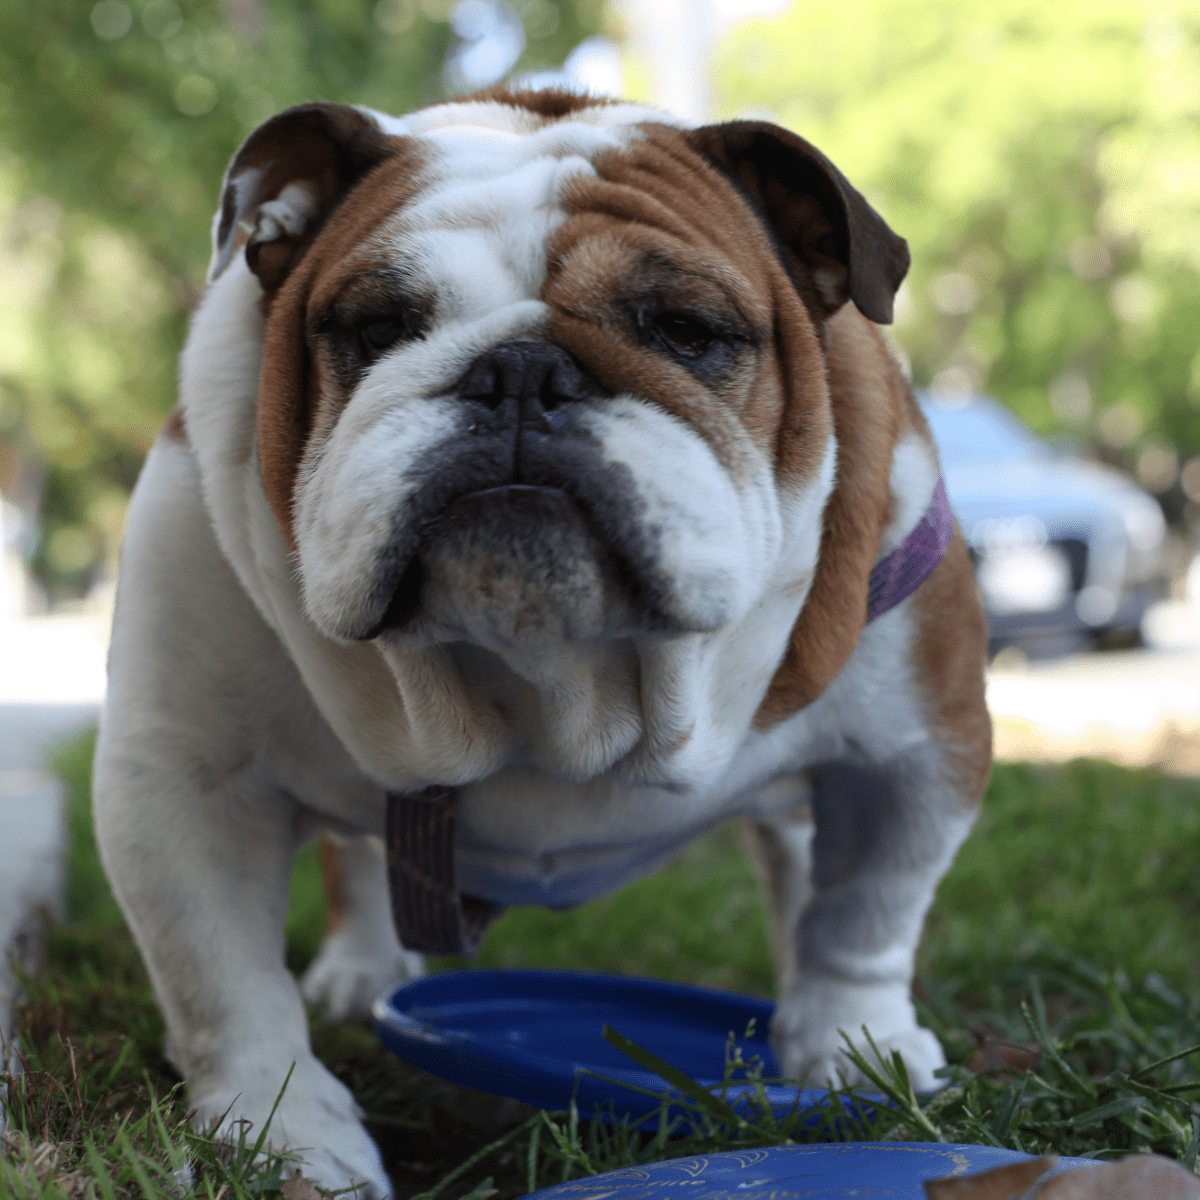 https://images.saymedia-content.com/.image/ar_1:1%2Cc_fill%2Ccs_srgb%2Cq_auto:eco%2Cw_1200/MTk2NDc4MjgyODYwODY0NjYy/raising-awareness-about-english-bulldog-health-problems.png